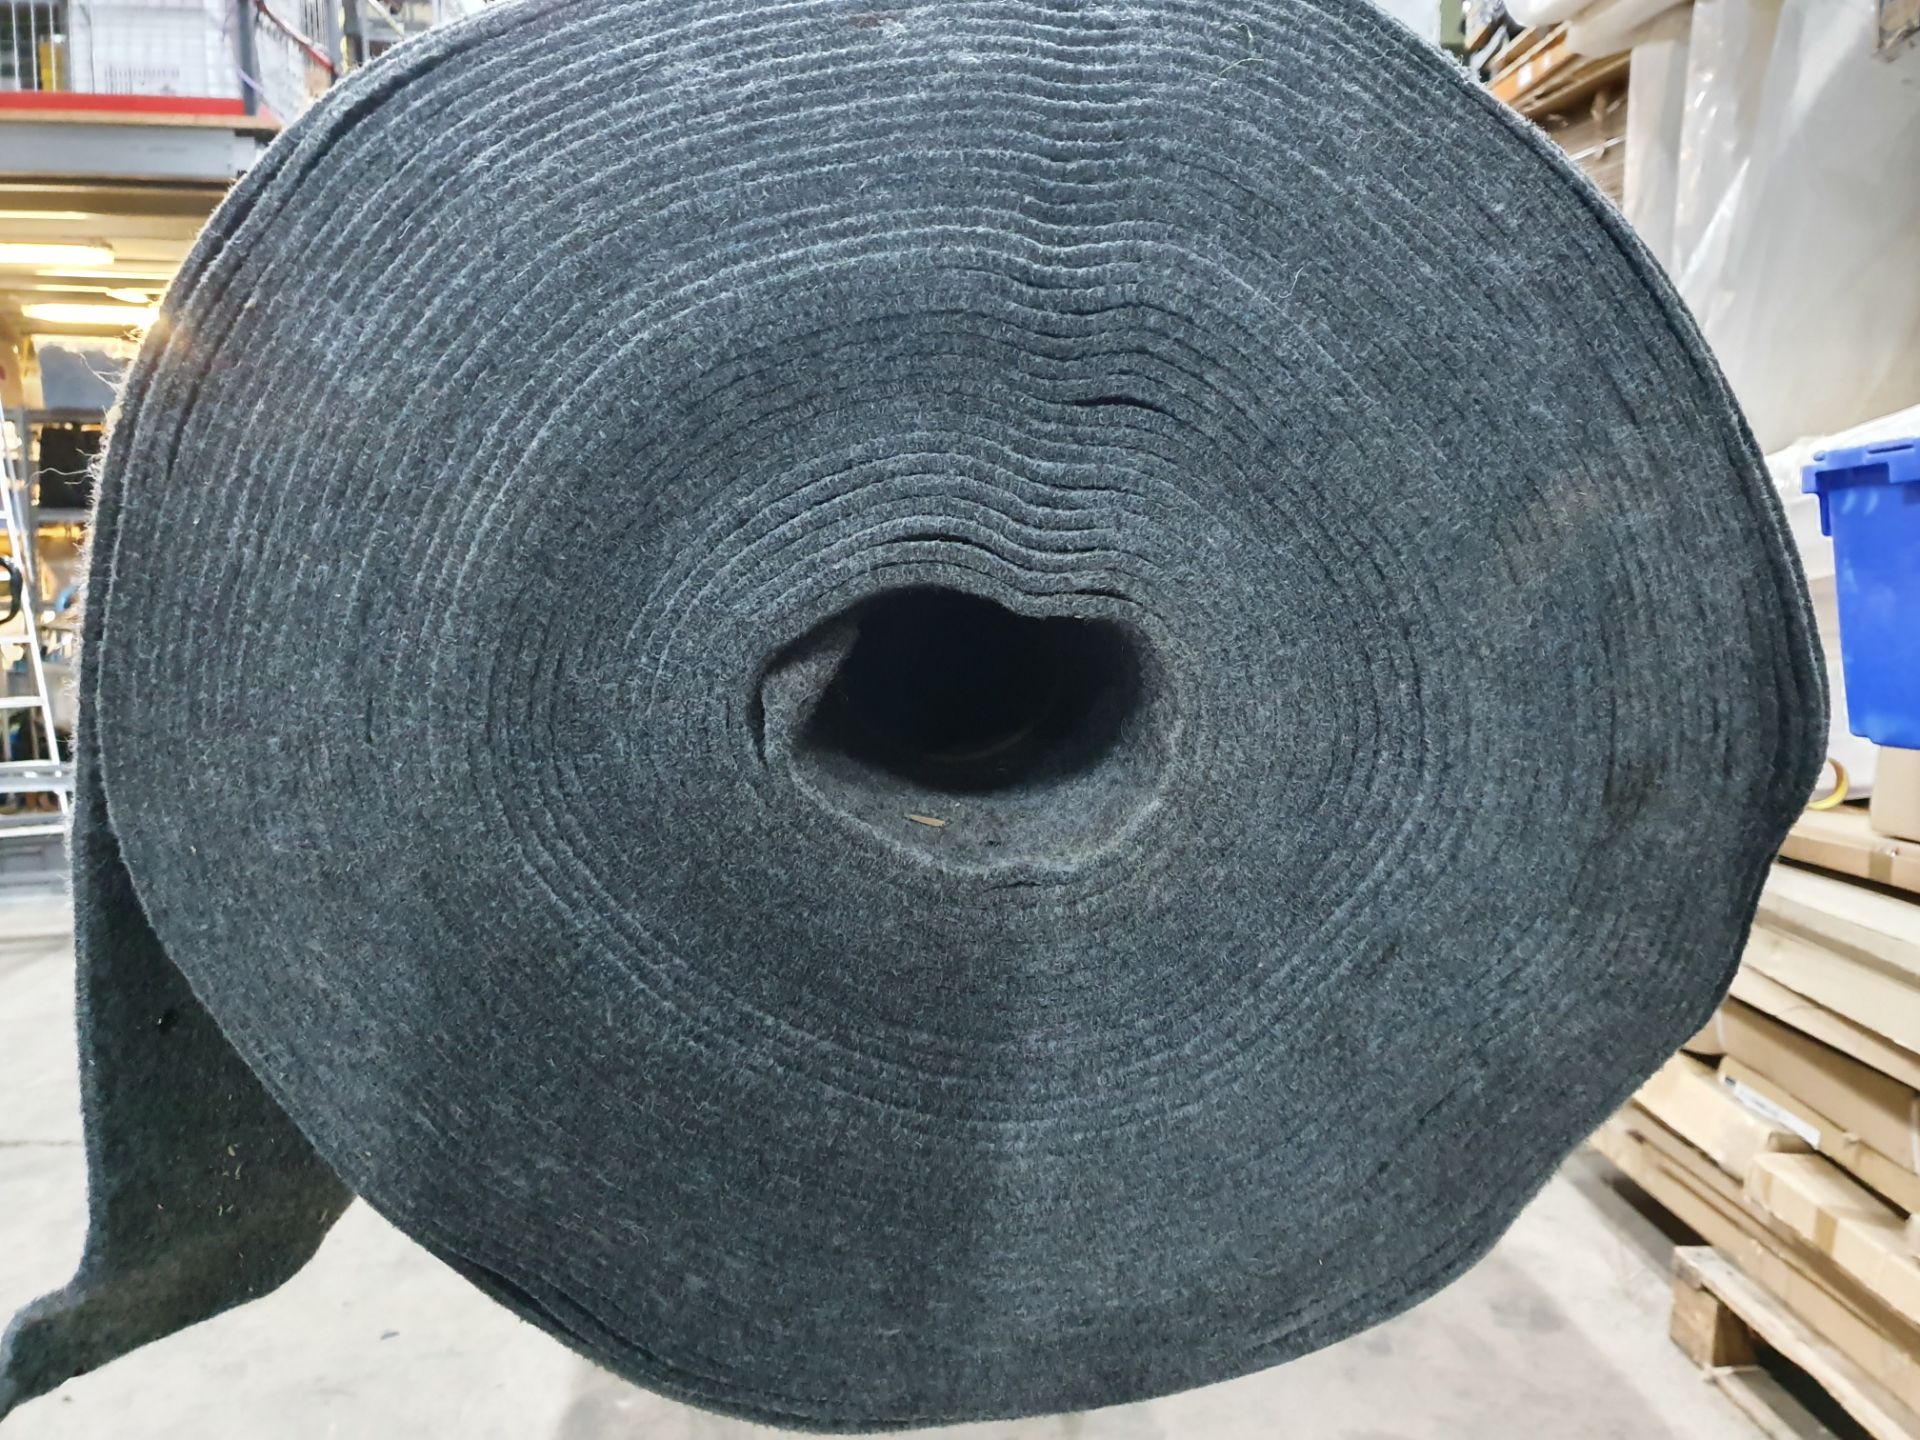 Roll of Grey Felt 8mm Thick Underlay | Approximate size: 4m x 35m - Image 4 of 4